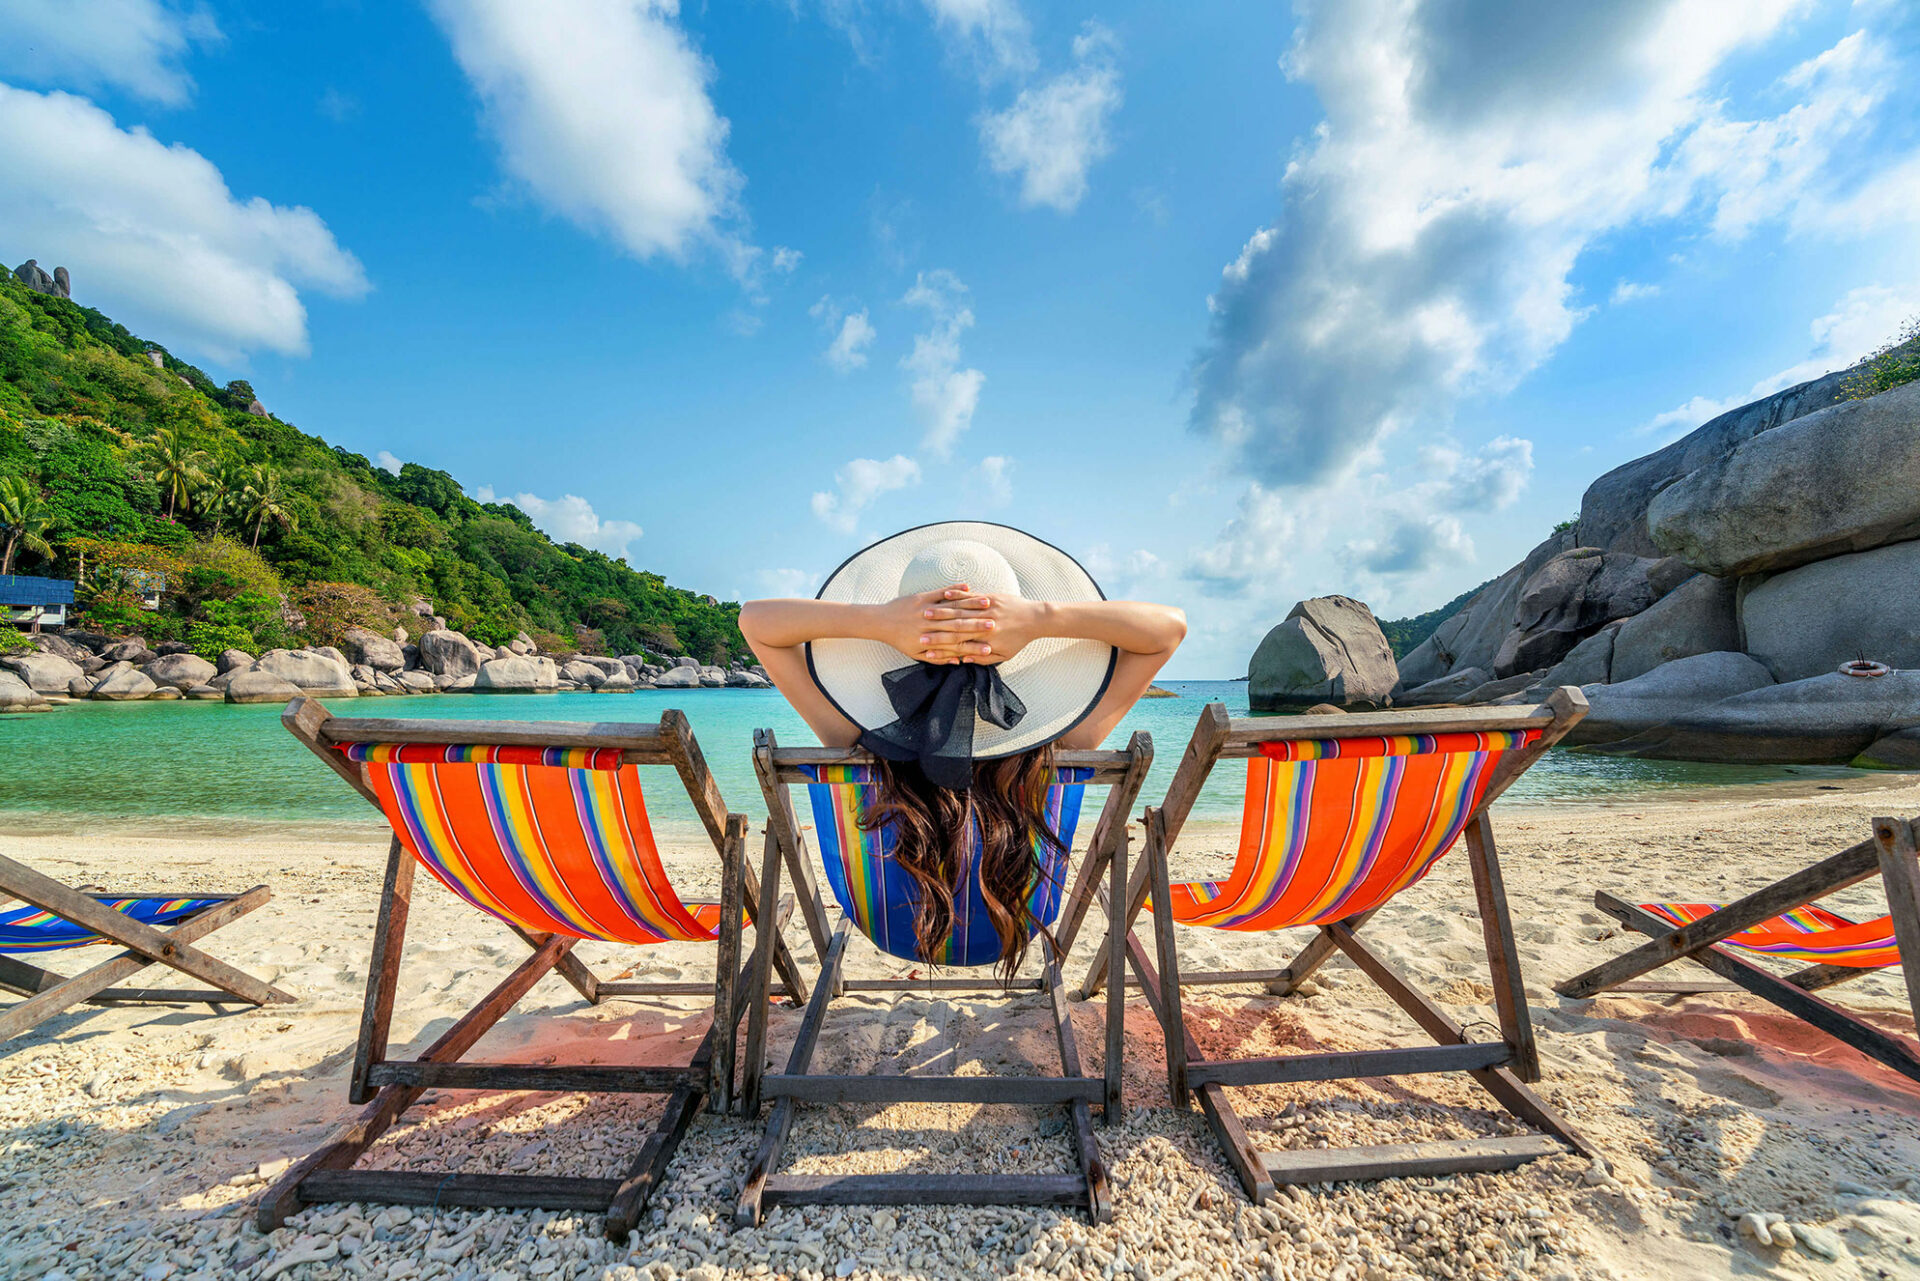 woman-with-hat-sitting-on-chairs-beach-in-beautiful-tropical-beach-woman-relaxing-on-tropical-beach-at-koh-nangyuan-island-(1)